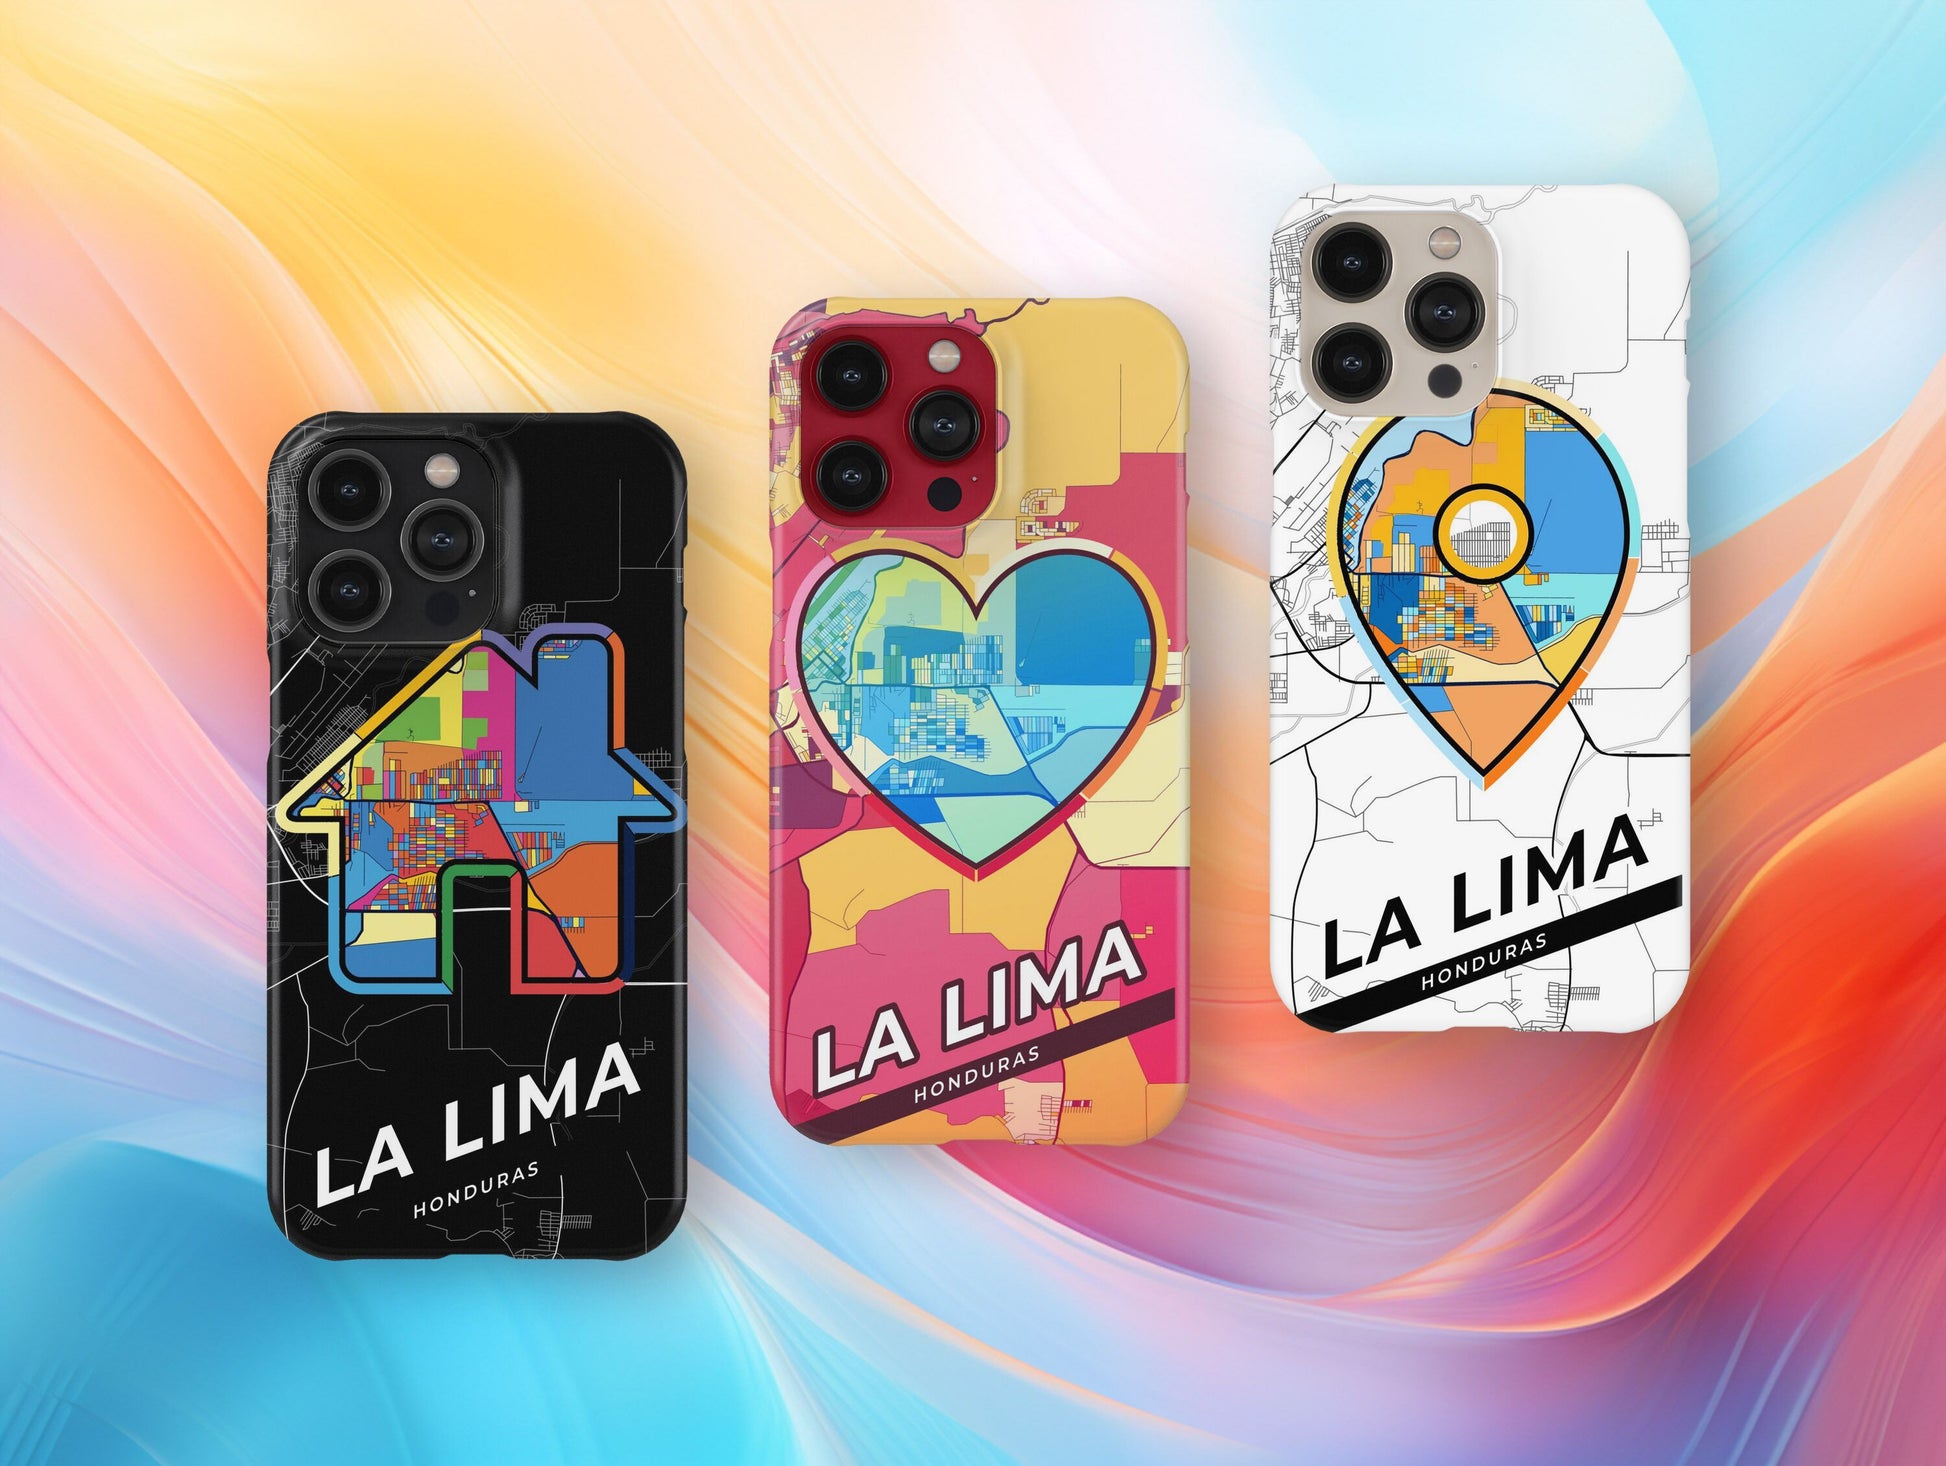 La Lima Honduras slim phone case with colorful icon. Birthday, wedding or housewarming gift. Couple match cases.